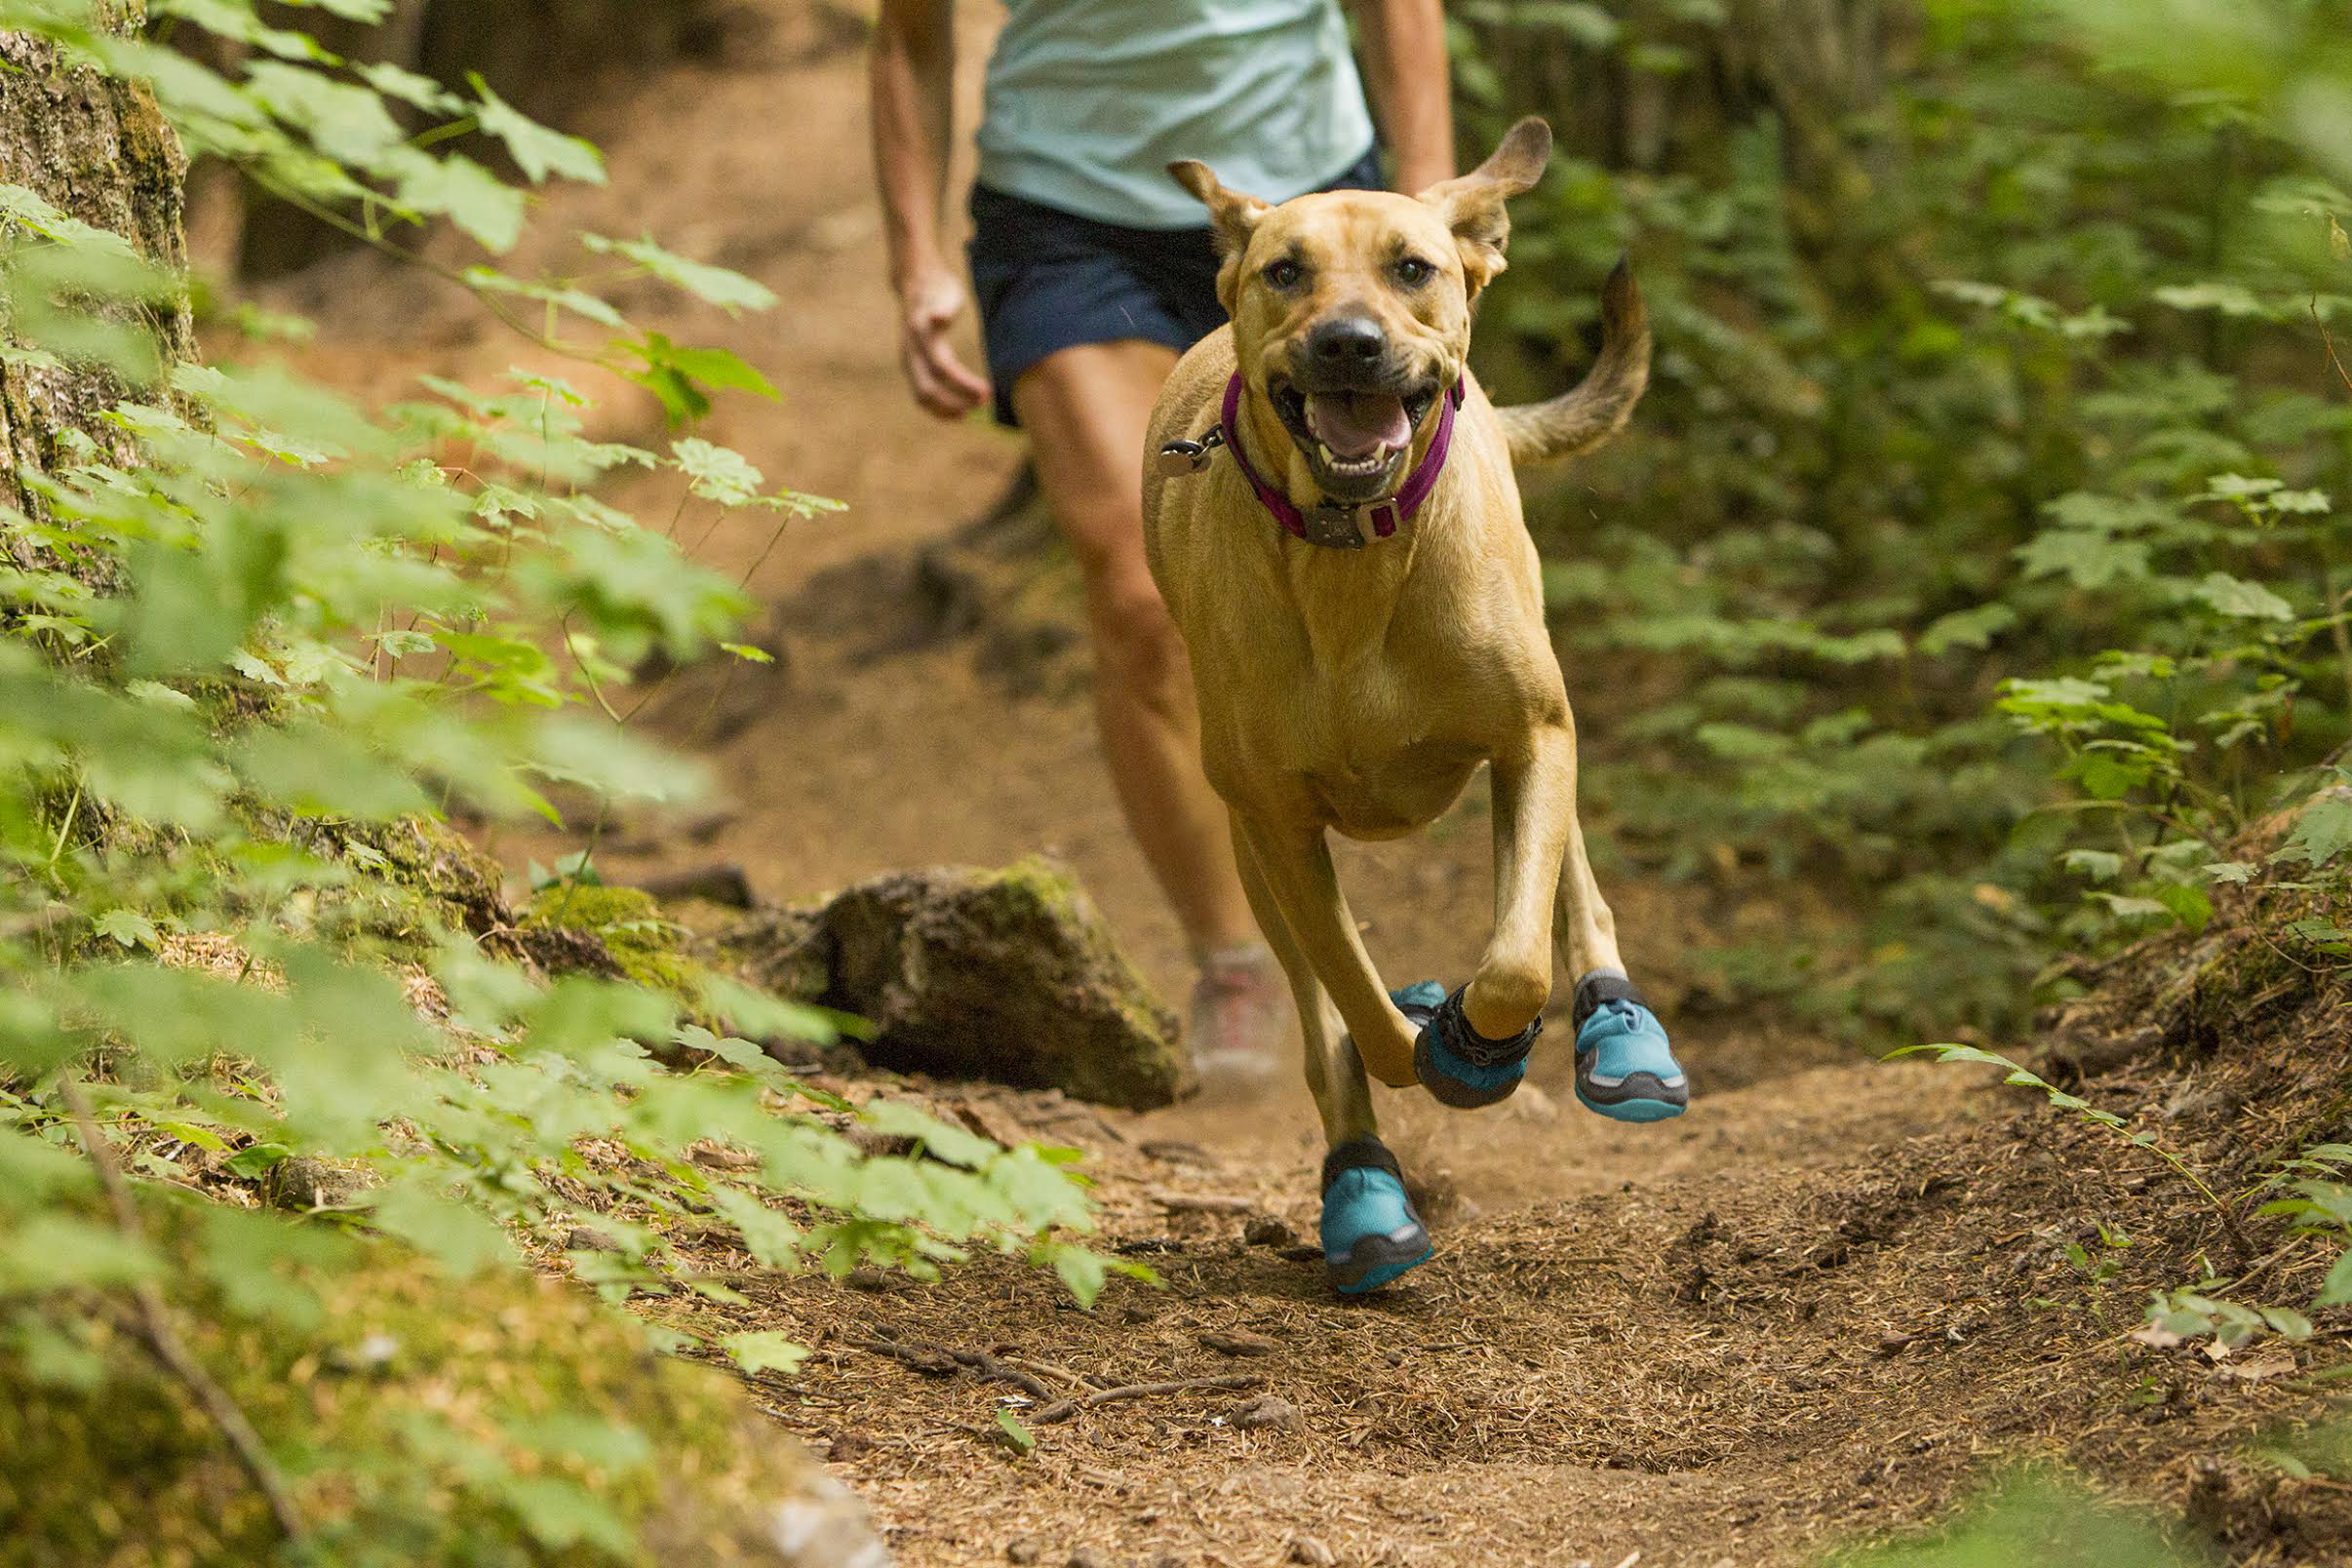 Outfitting your hiking dog